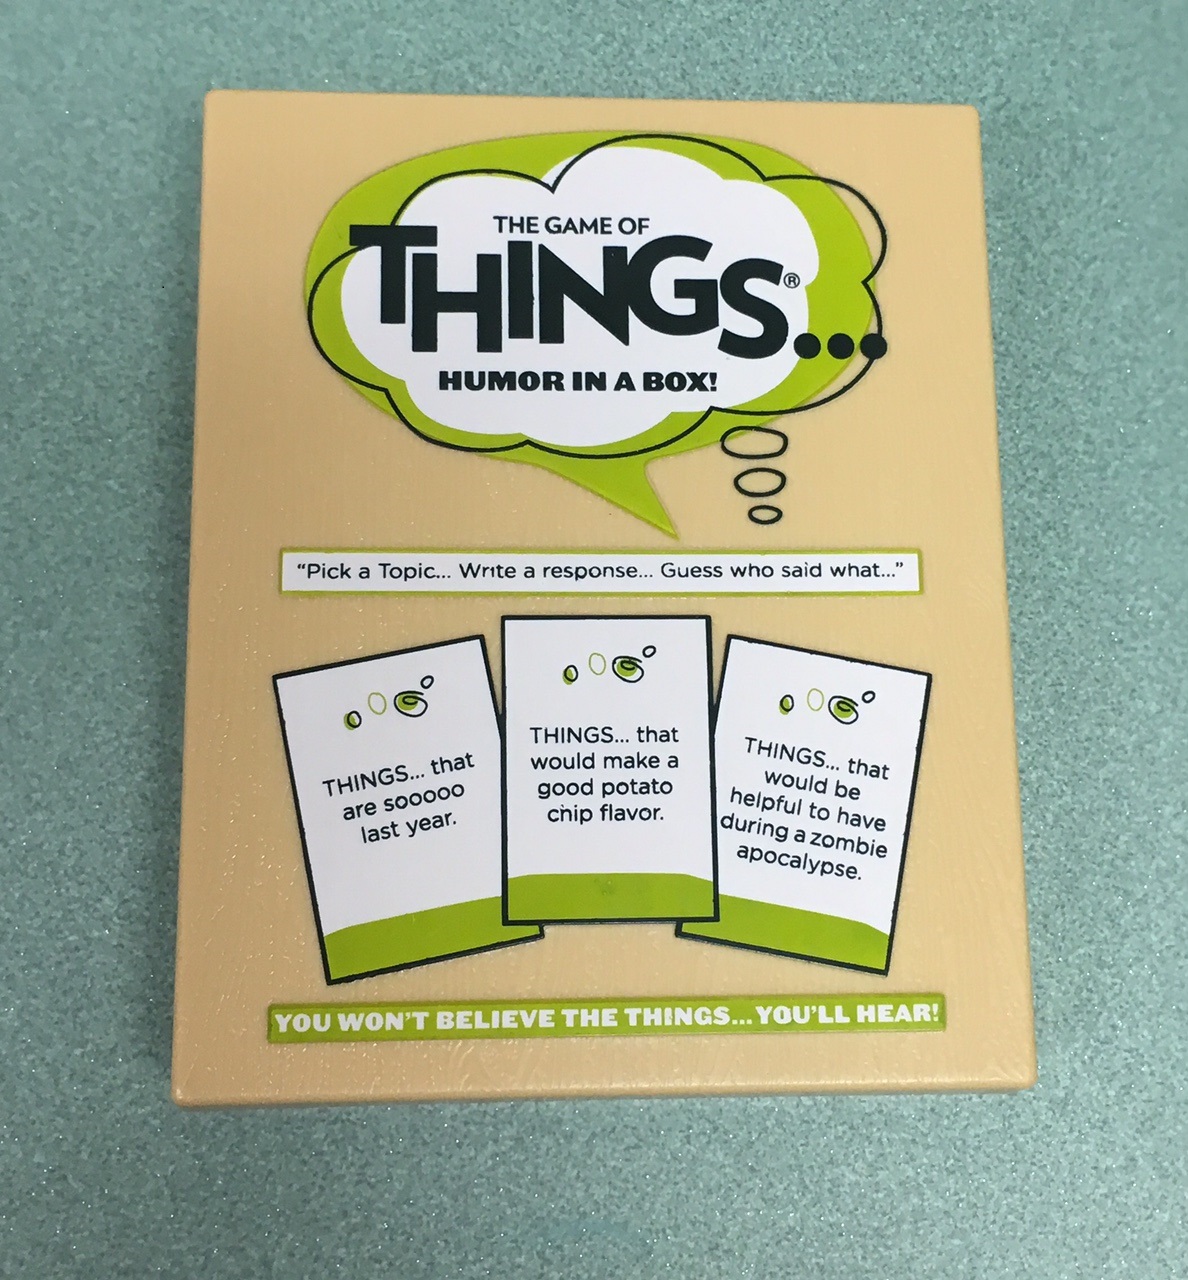 The box cover for The Game of Things